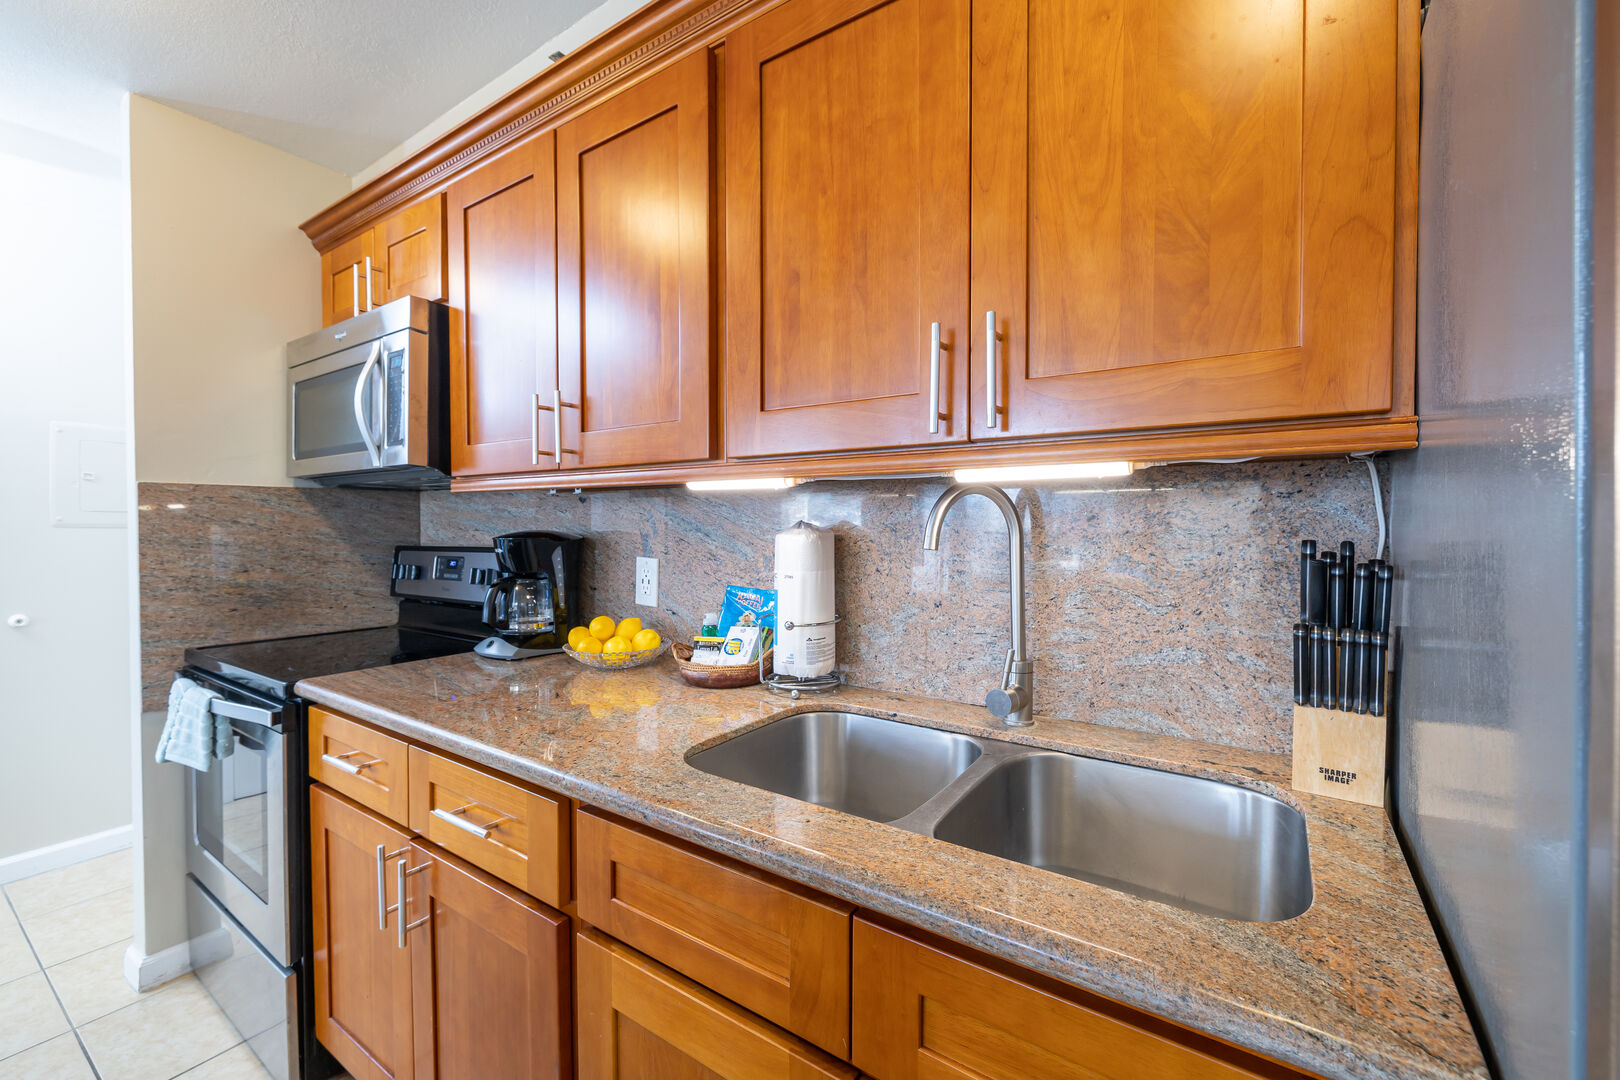 Fully equipped kitchen for your culinary needs.